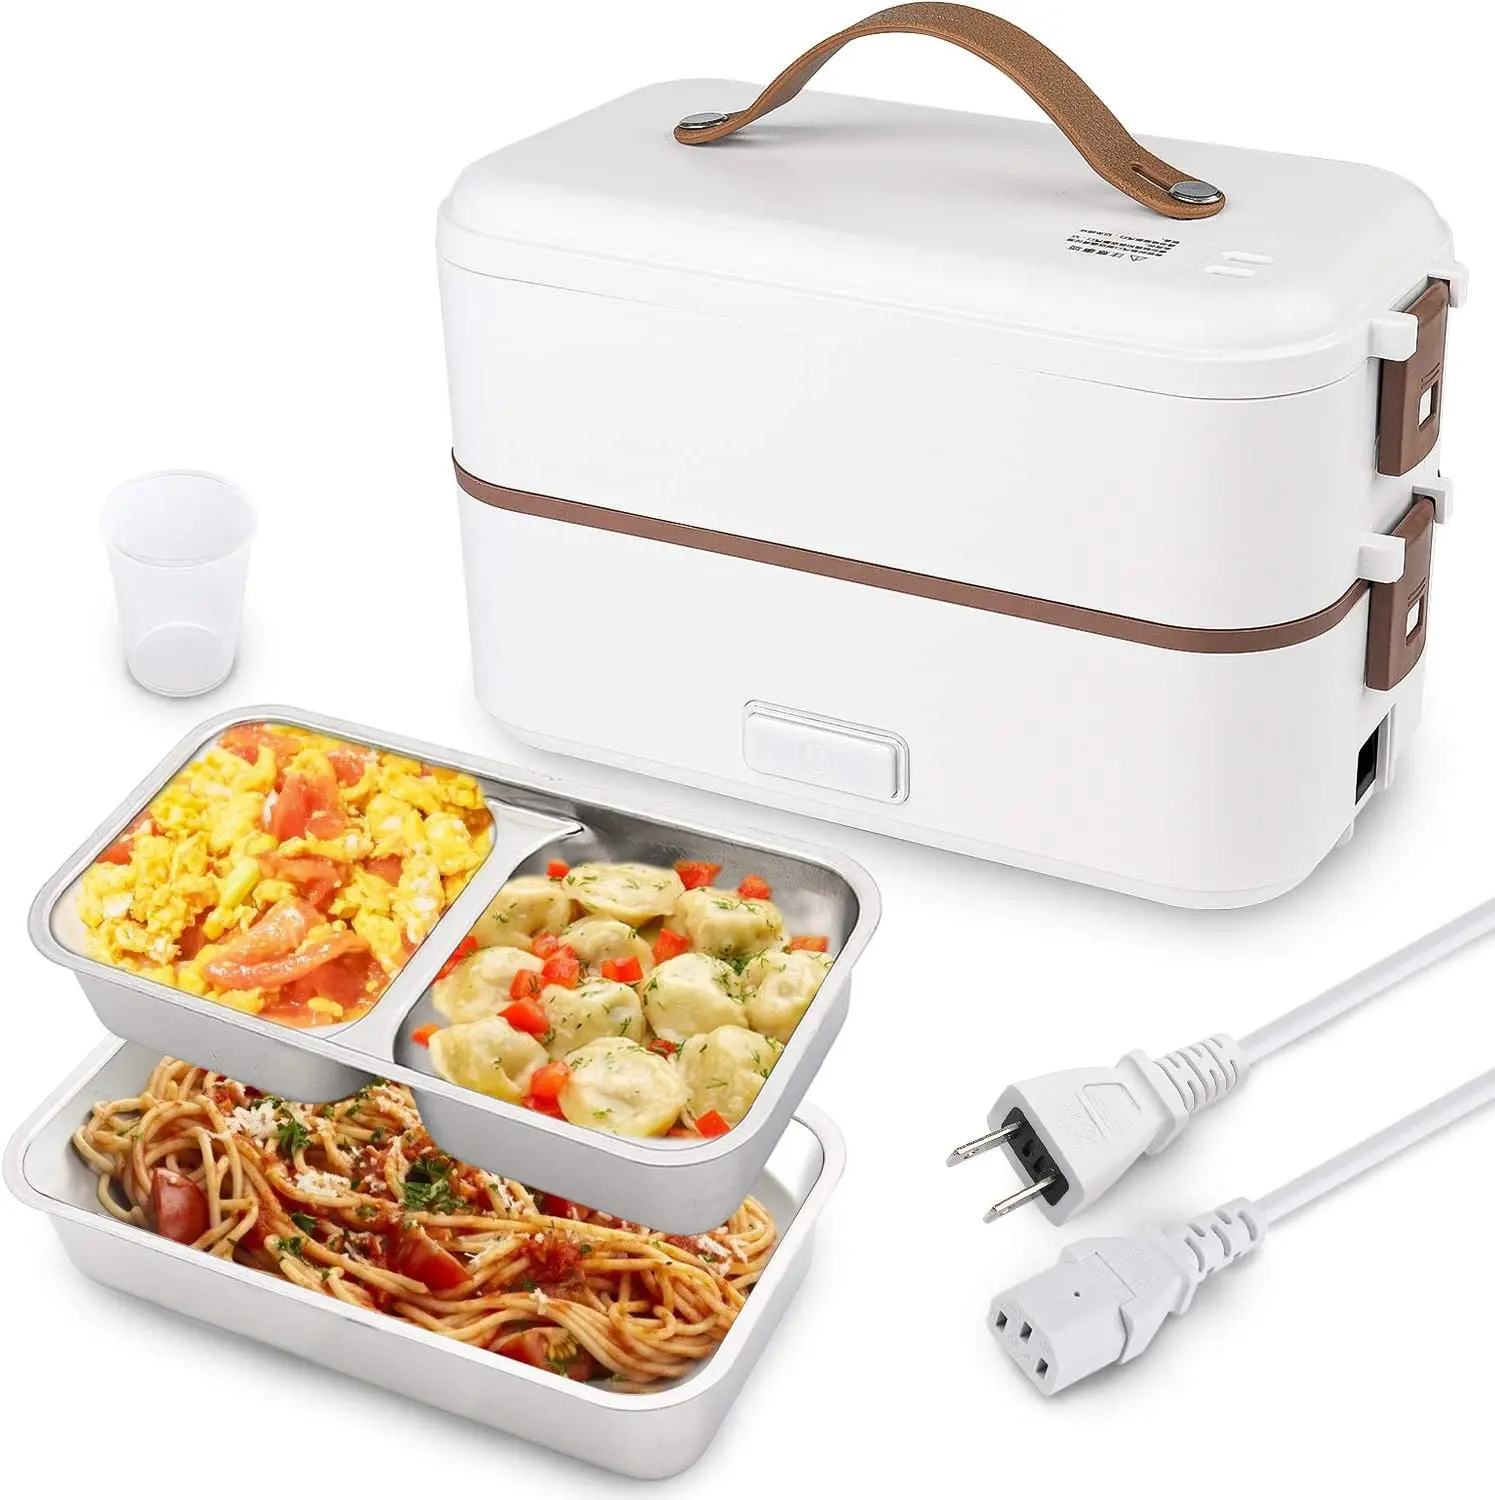 

800ML 110V Camping 2 Layers Steamer Mini Cooker Self Cooking stainless steel heating food warmer portable Electric Lunch Box